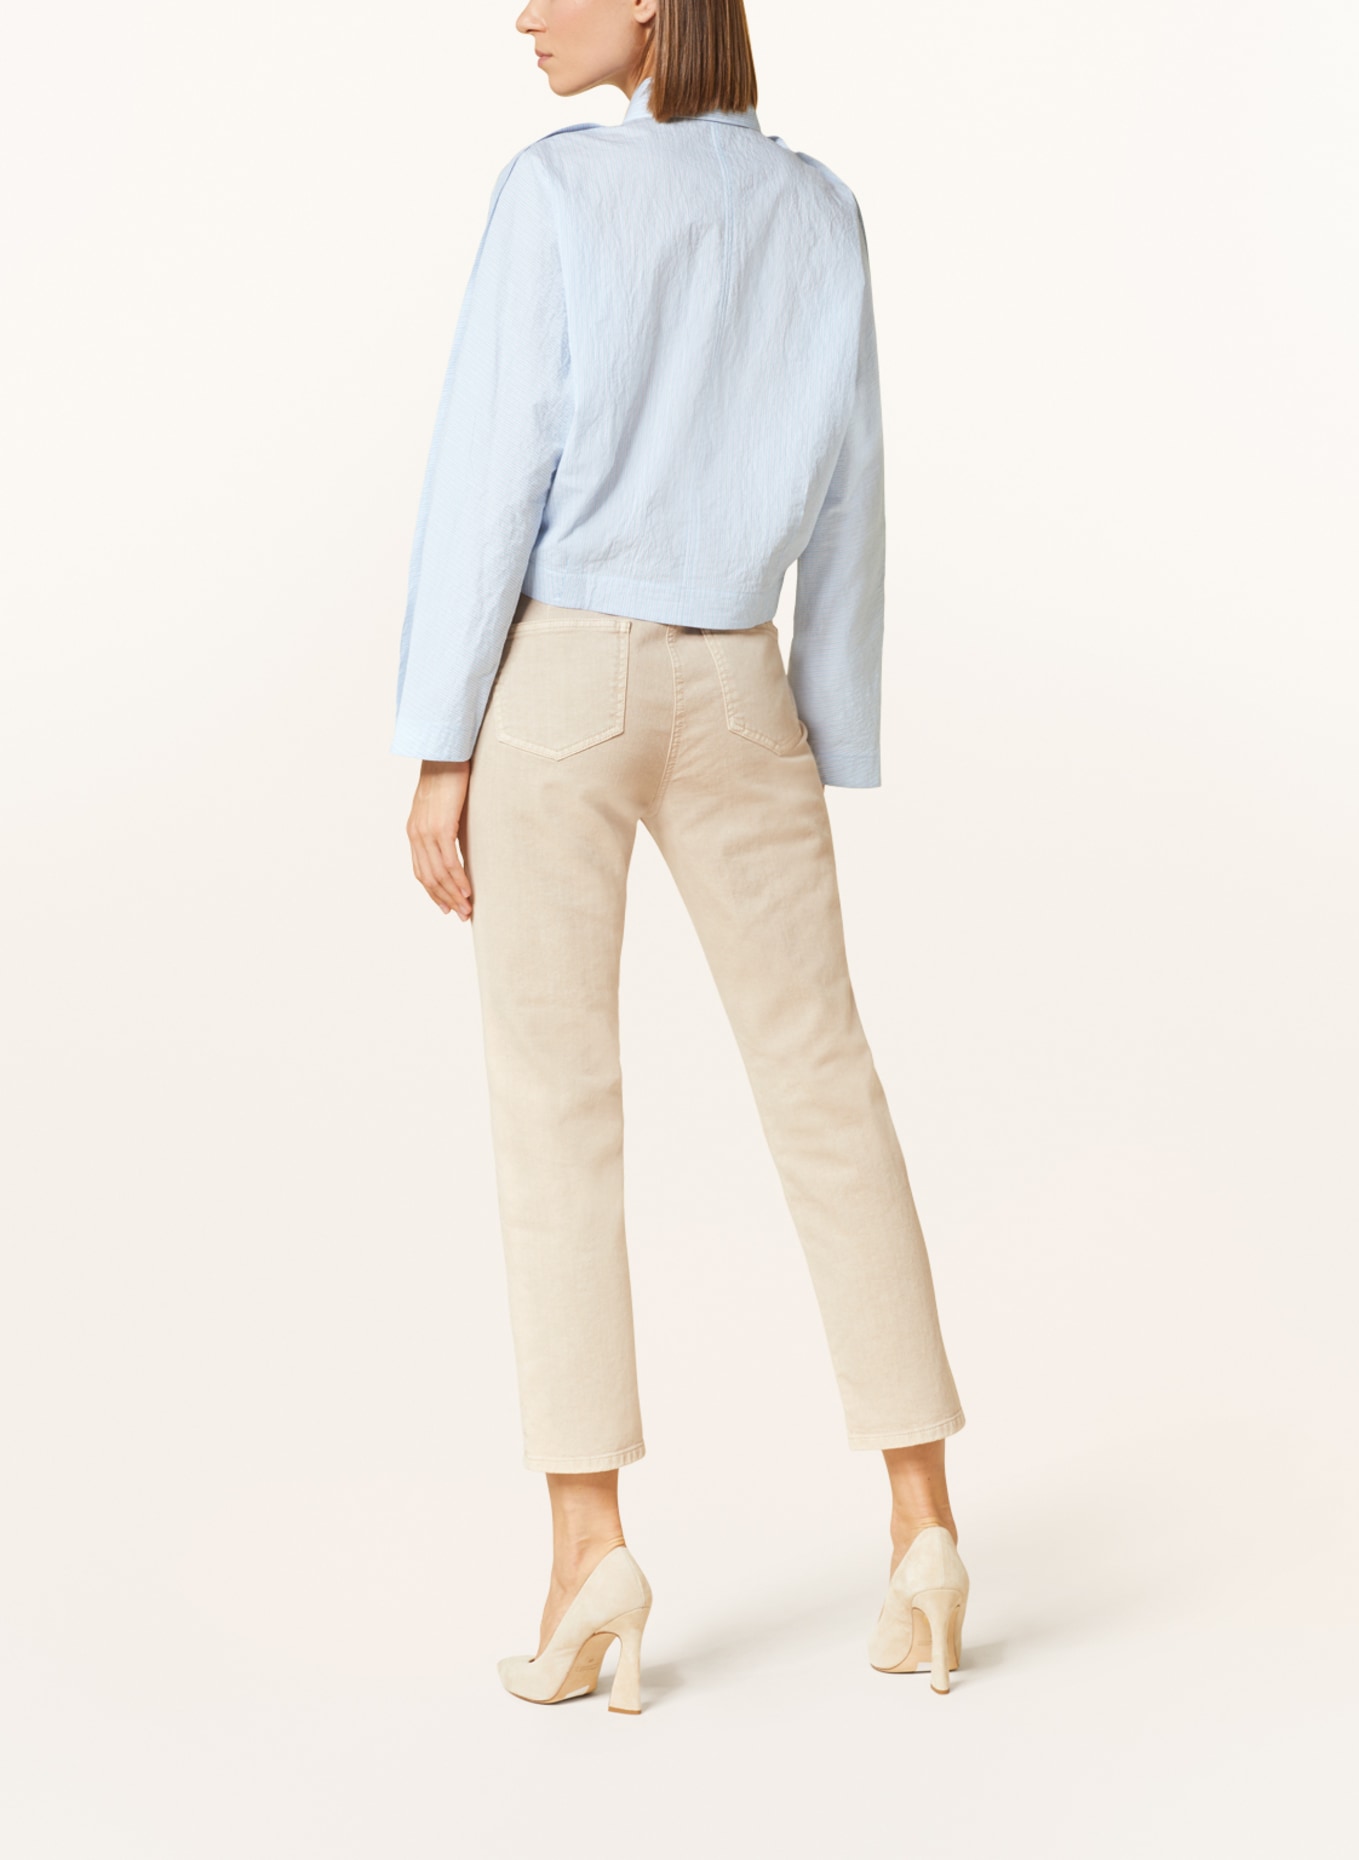 LUISA CERANO Cropped shirt blouse, Color: LIGHT BLUE/ WHITE (Image 3)